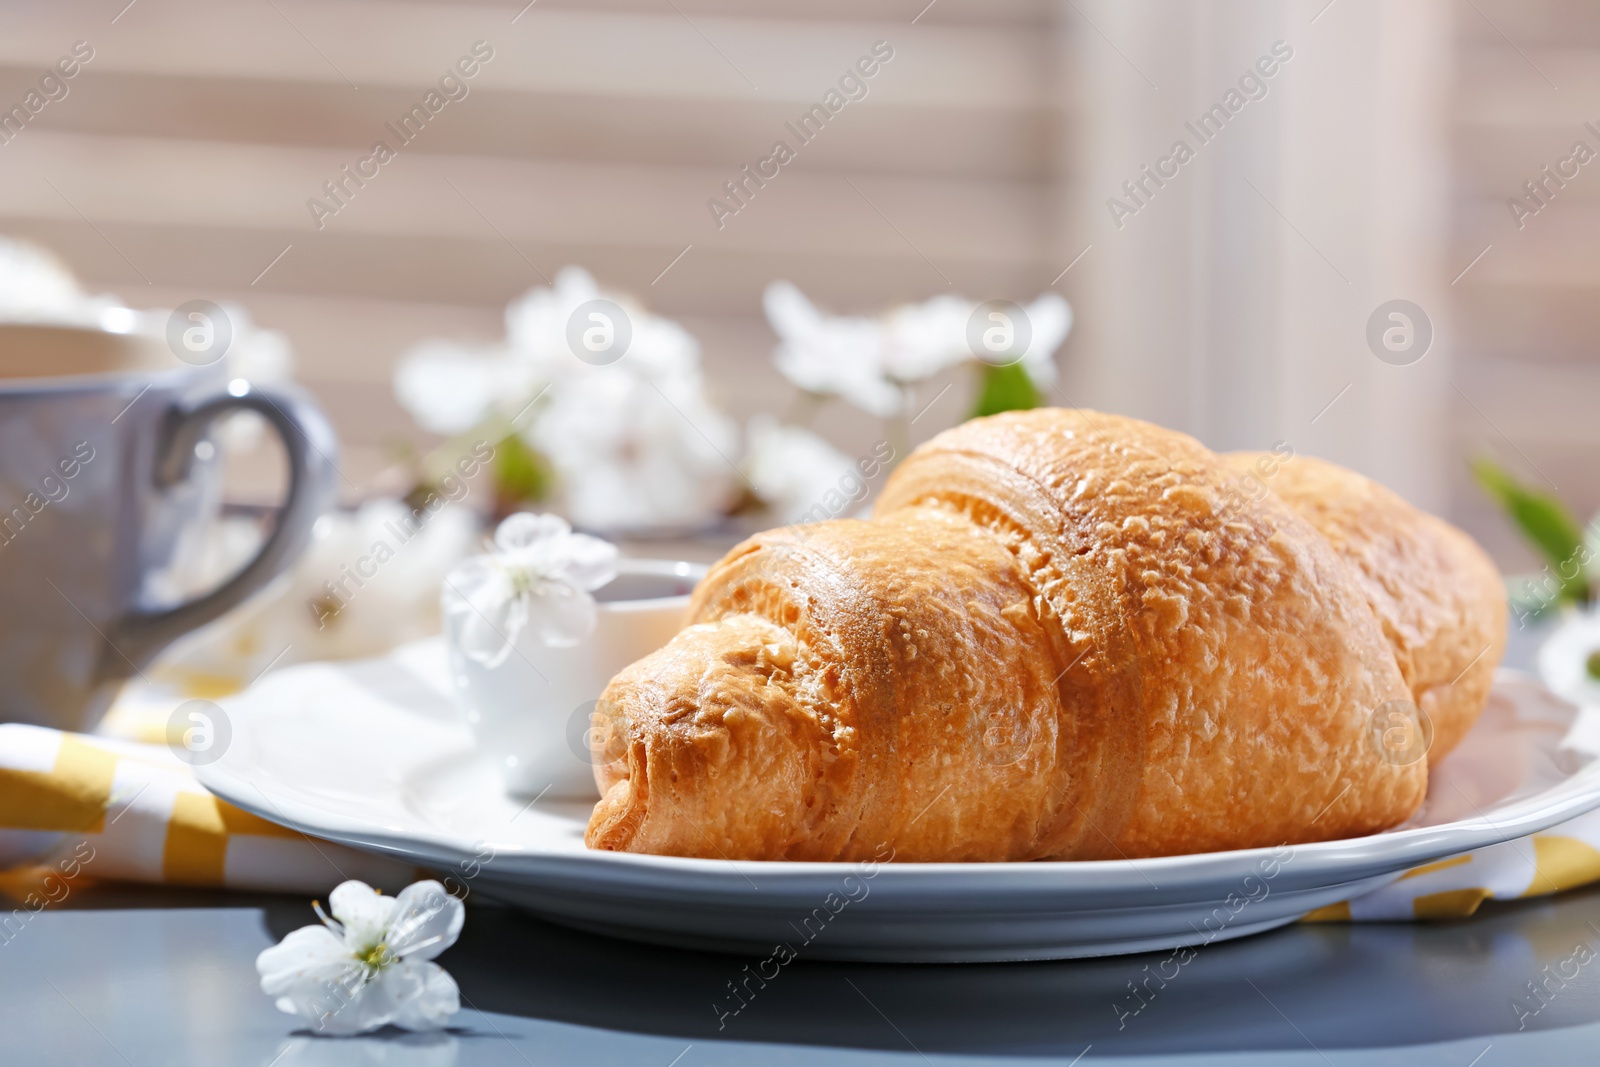 Photo of Plate with tasty croissant for breakfast on table